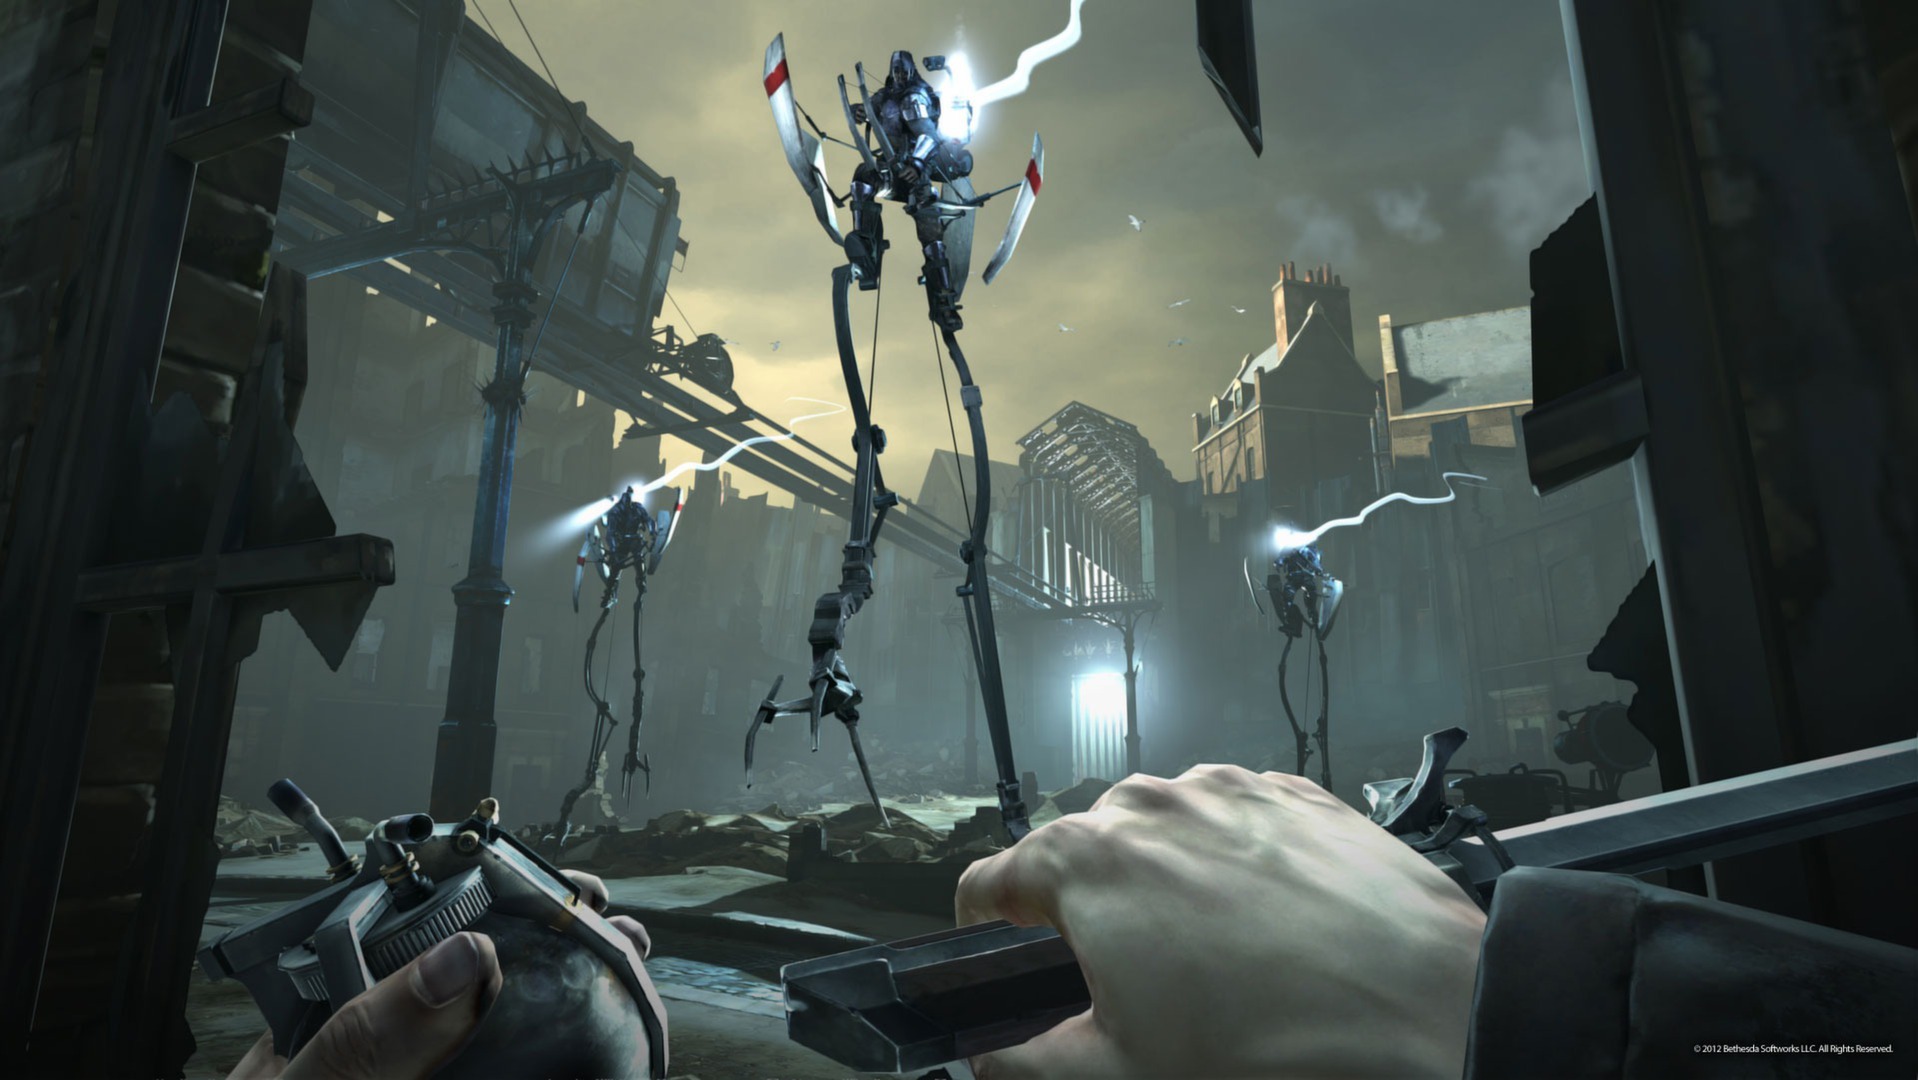 Dishonored - Void Walker Arsenal Featured Screenshot #1